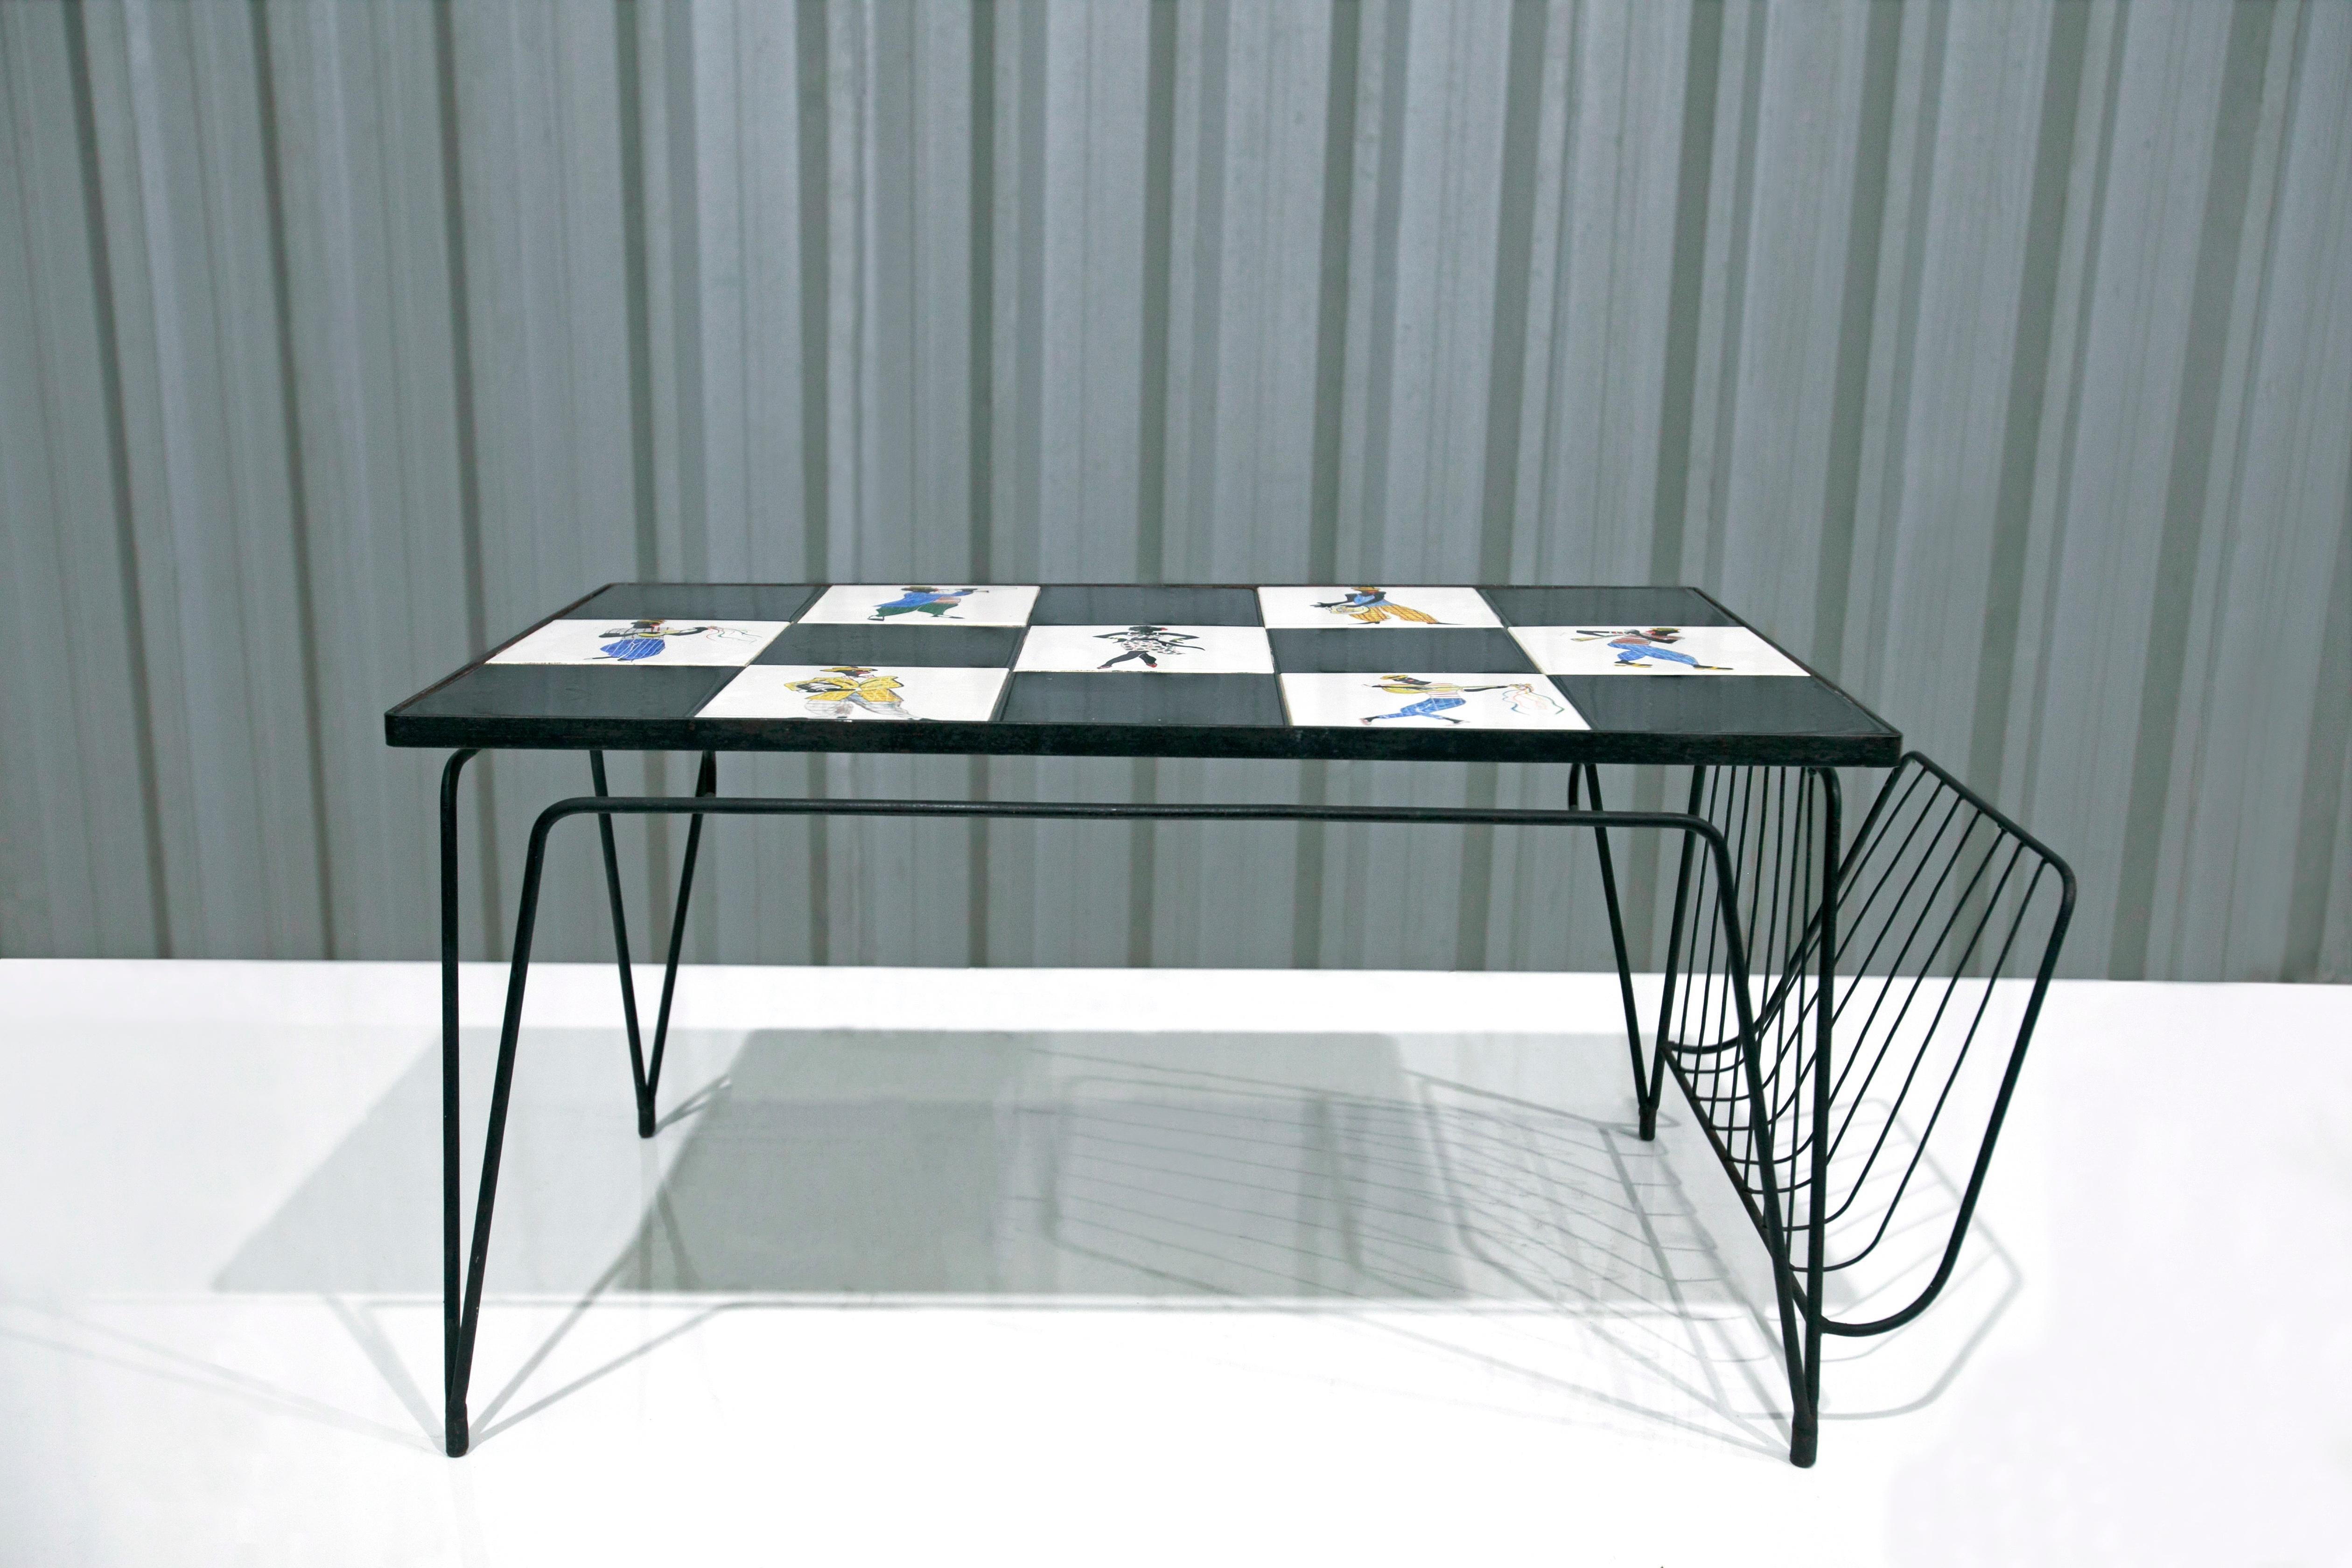 Metalwork Brazilian Modern Checkered Coffee Table in Metal & Tile w. Illustration, 1950s For Sale